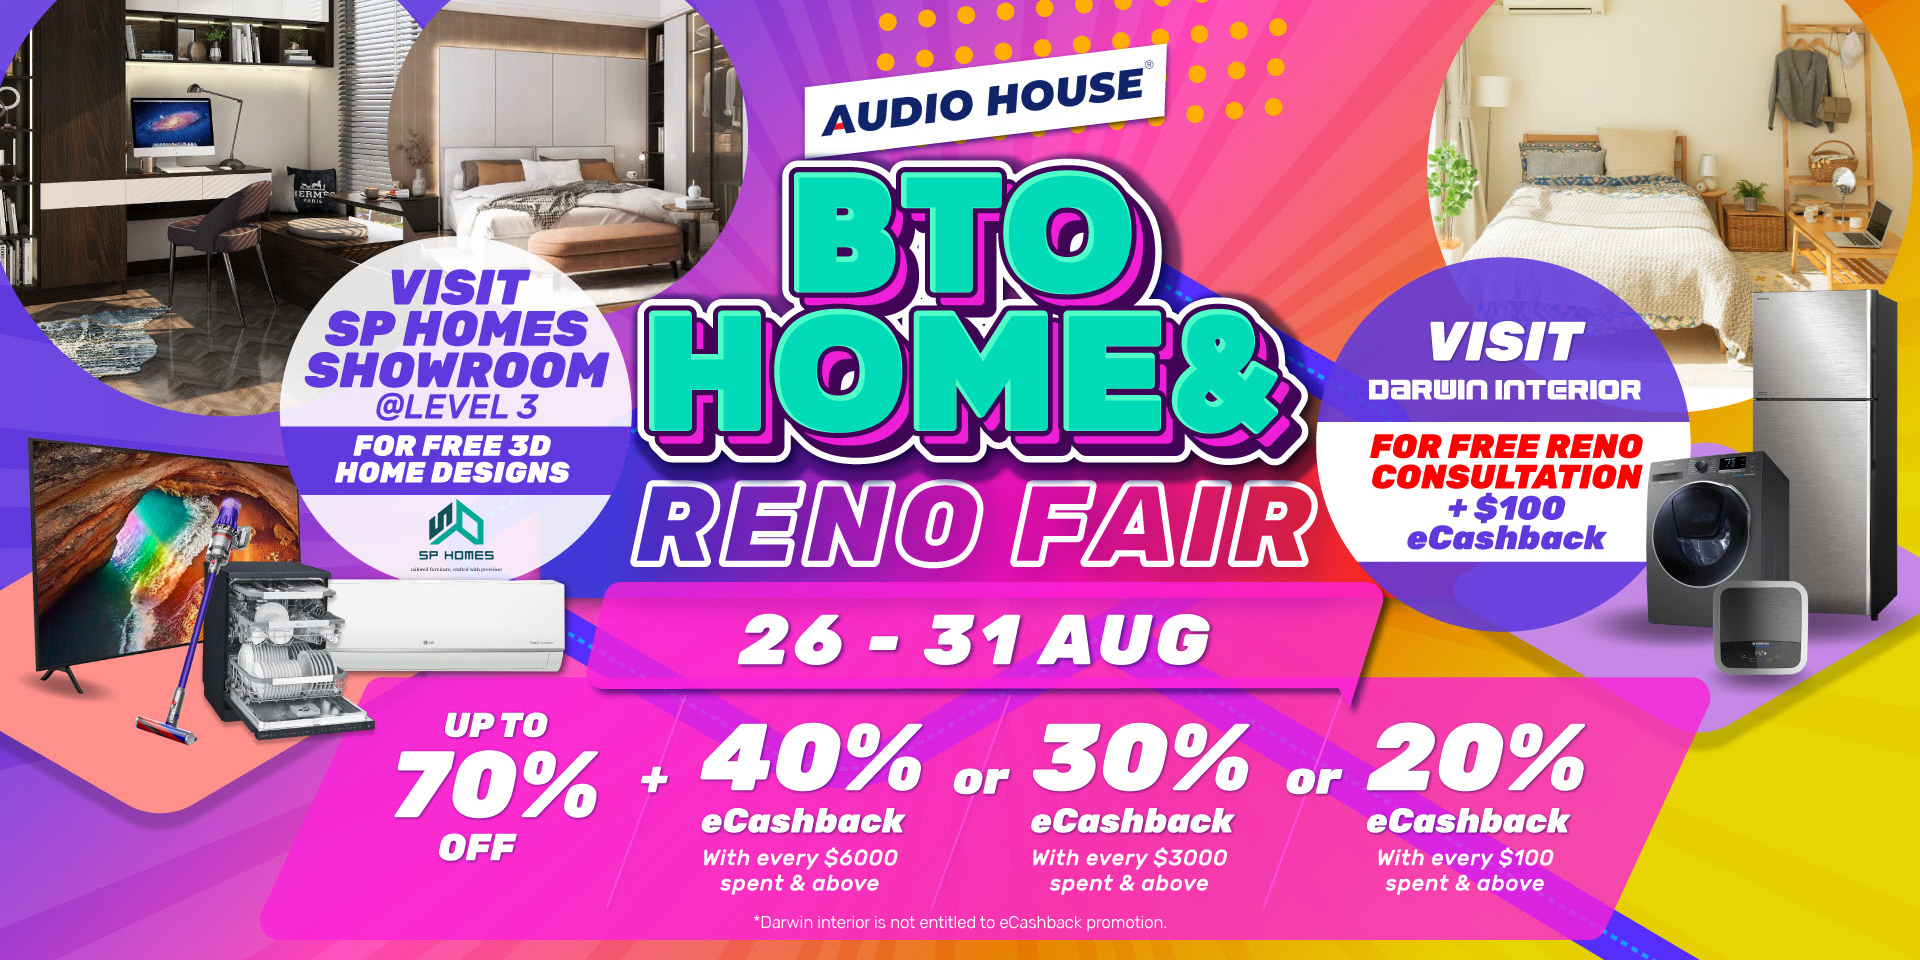 Get Up to 70% OFF + Up to $40 eCashback* & More at Audio House BTO Home & Reno Fair from 26 – 31 Aug